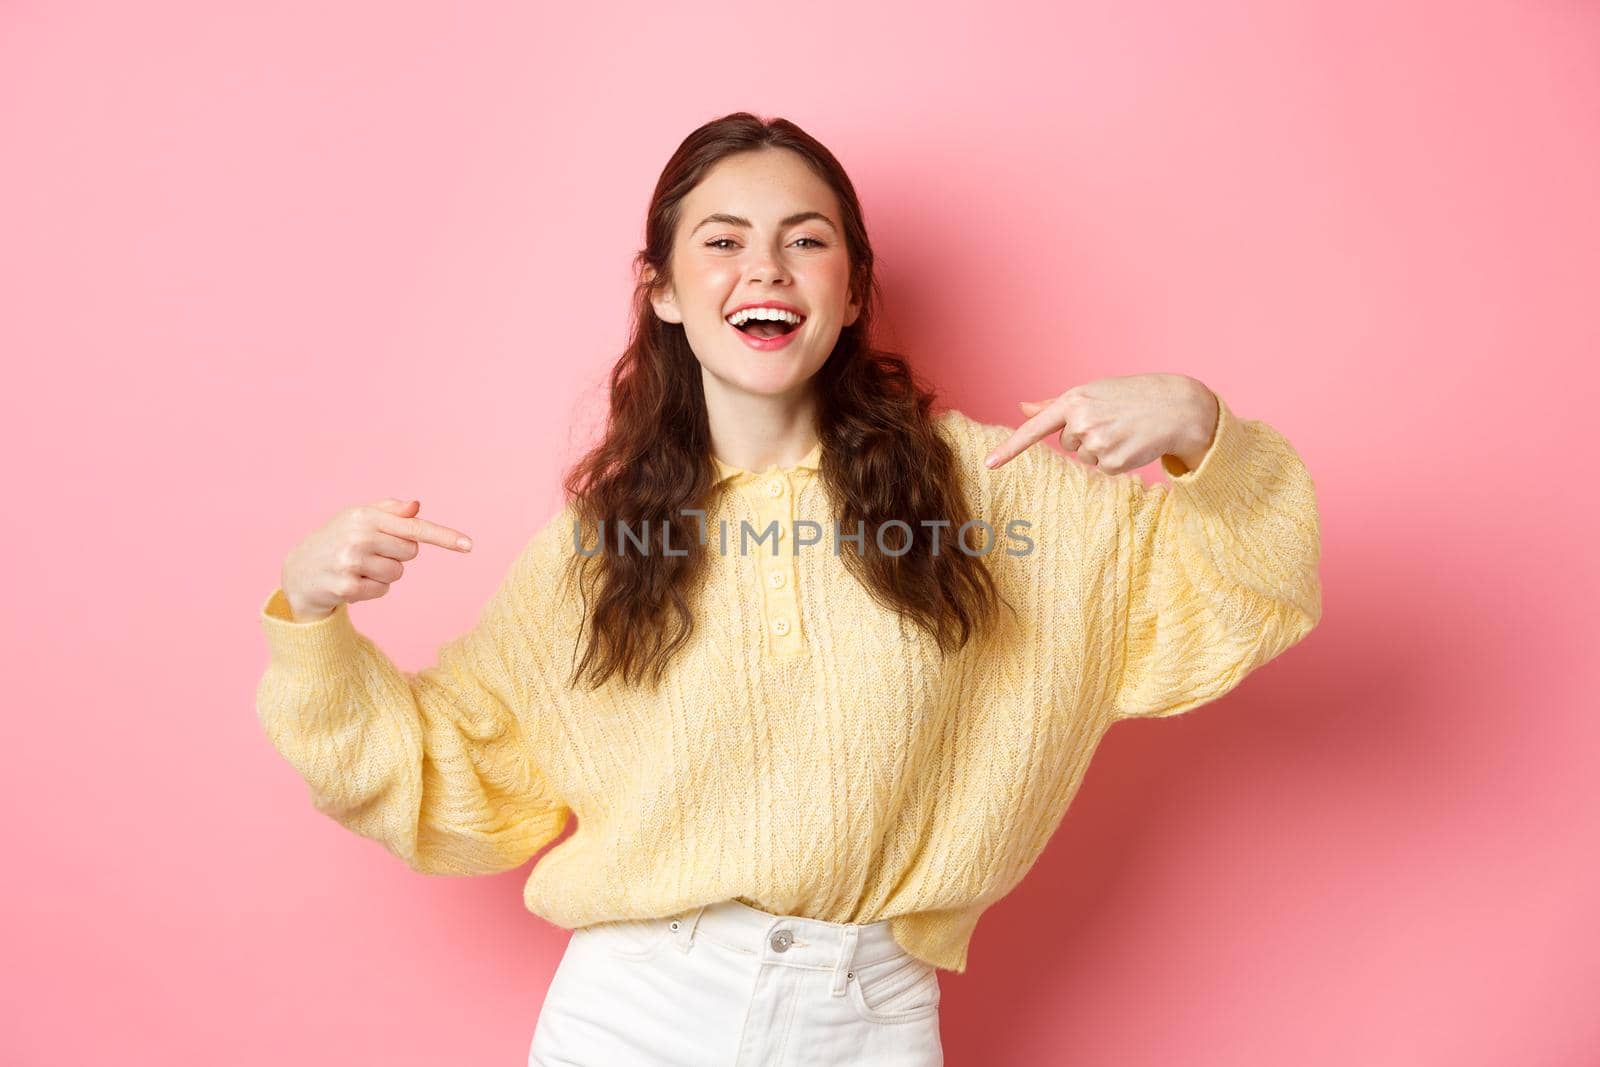 Self-assured happy girl points at herself and laughs, self-promoting and smiling, standing against pink background.